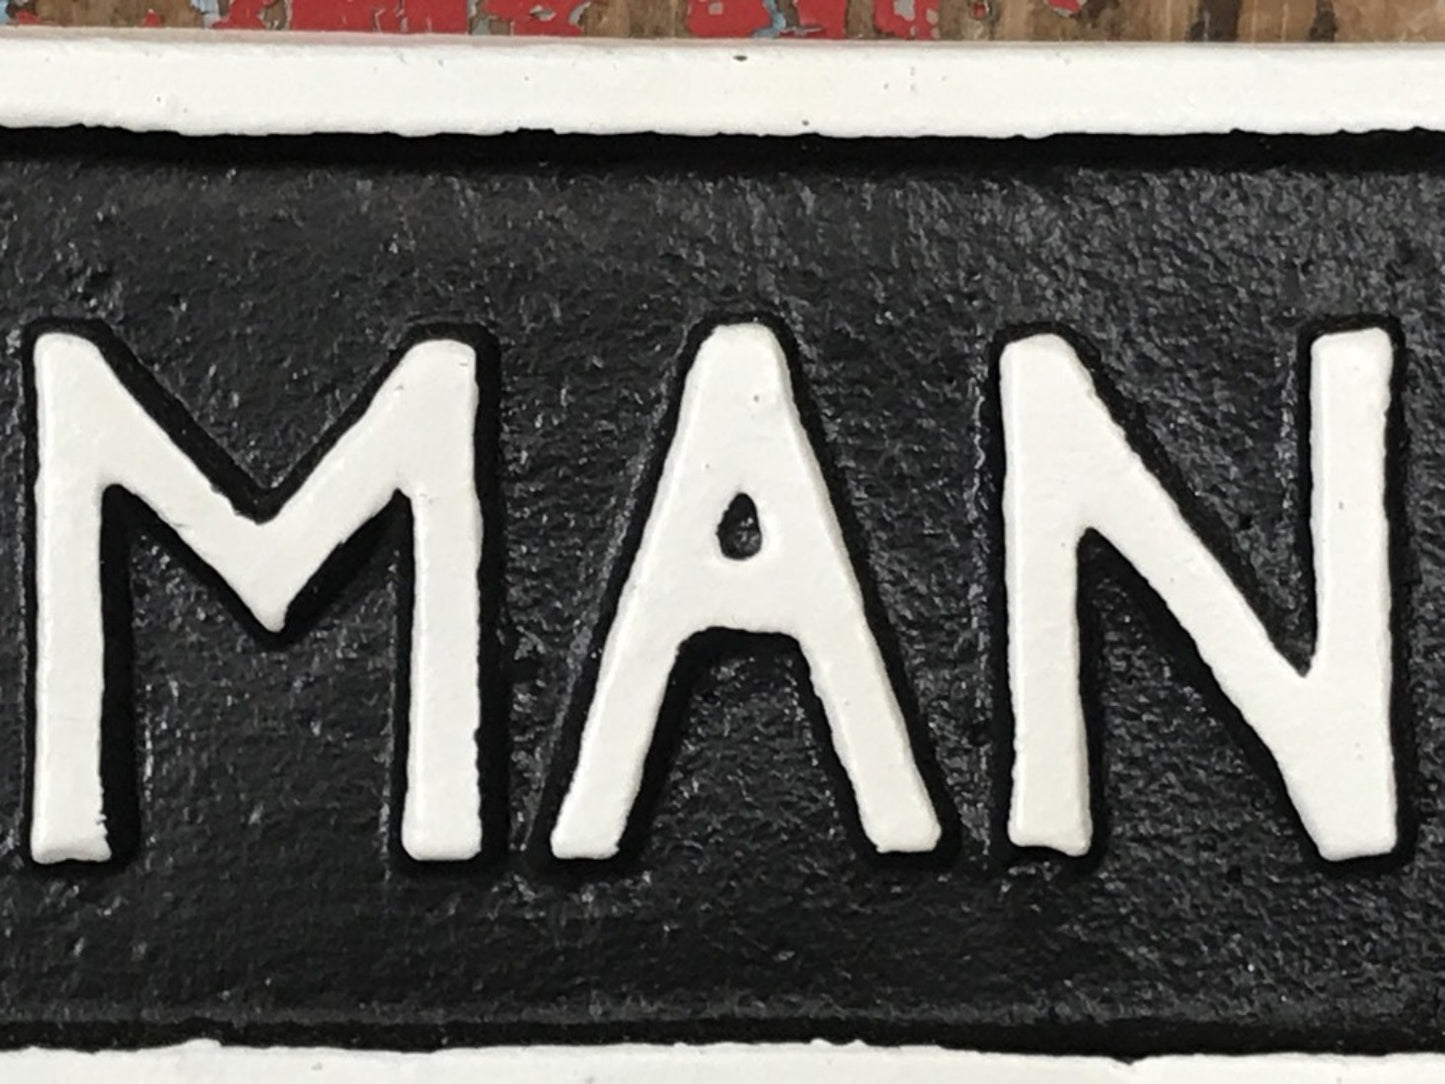 Cast Iron Sign “MAN CAVE” Black Background With White Text & Border